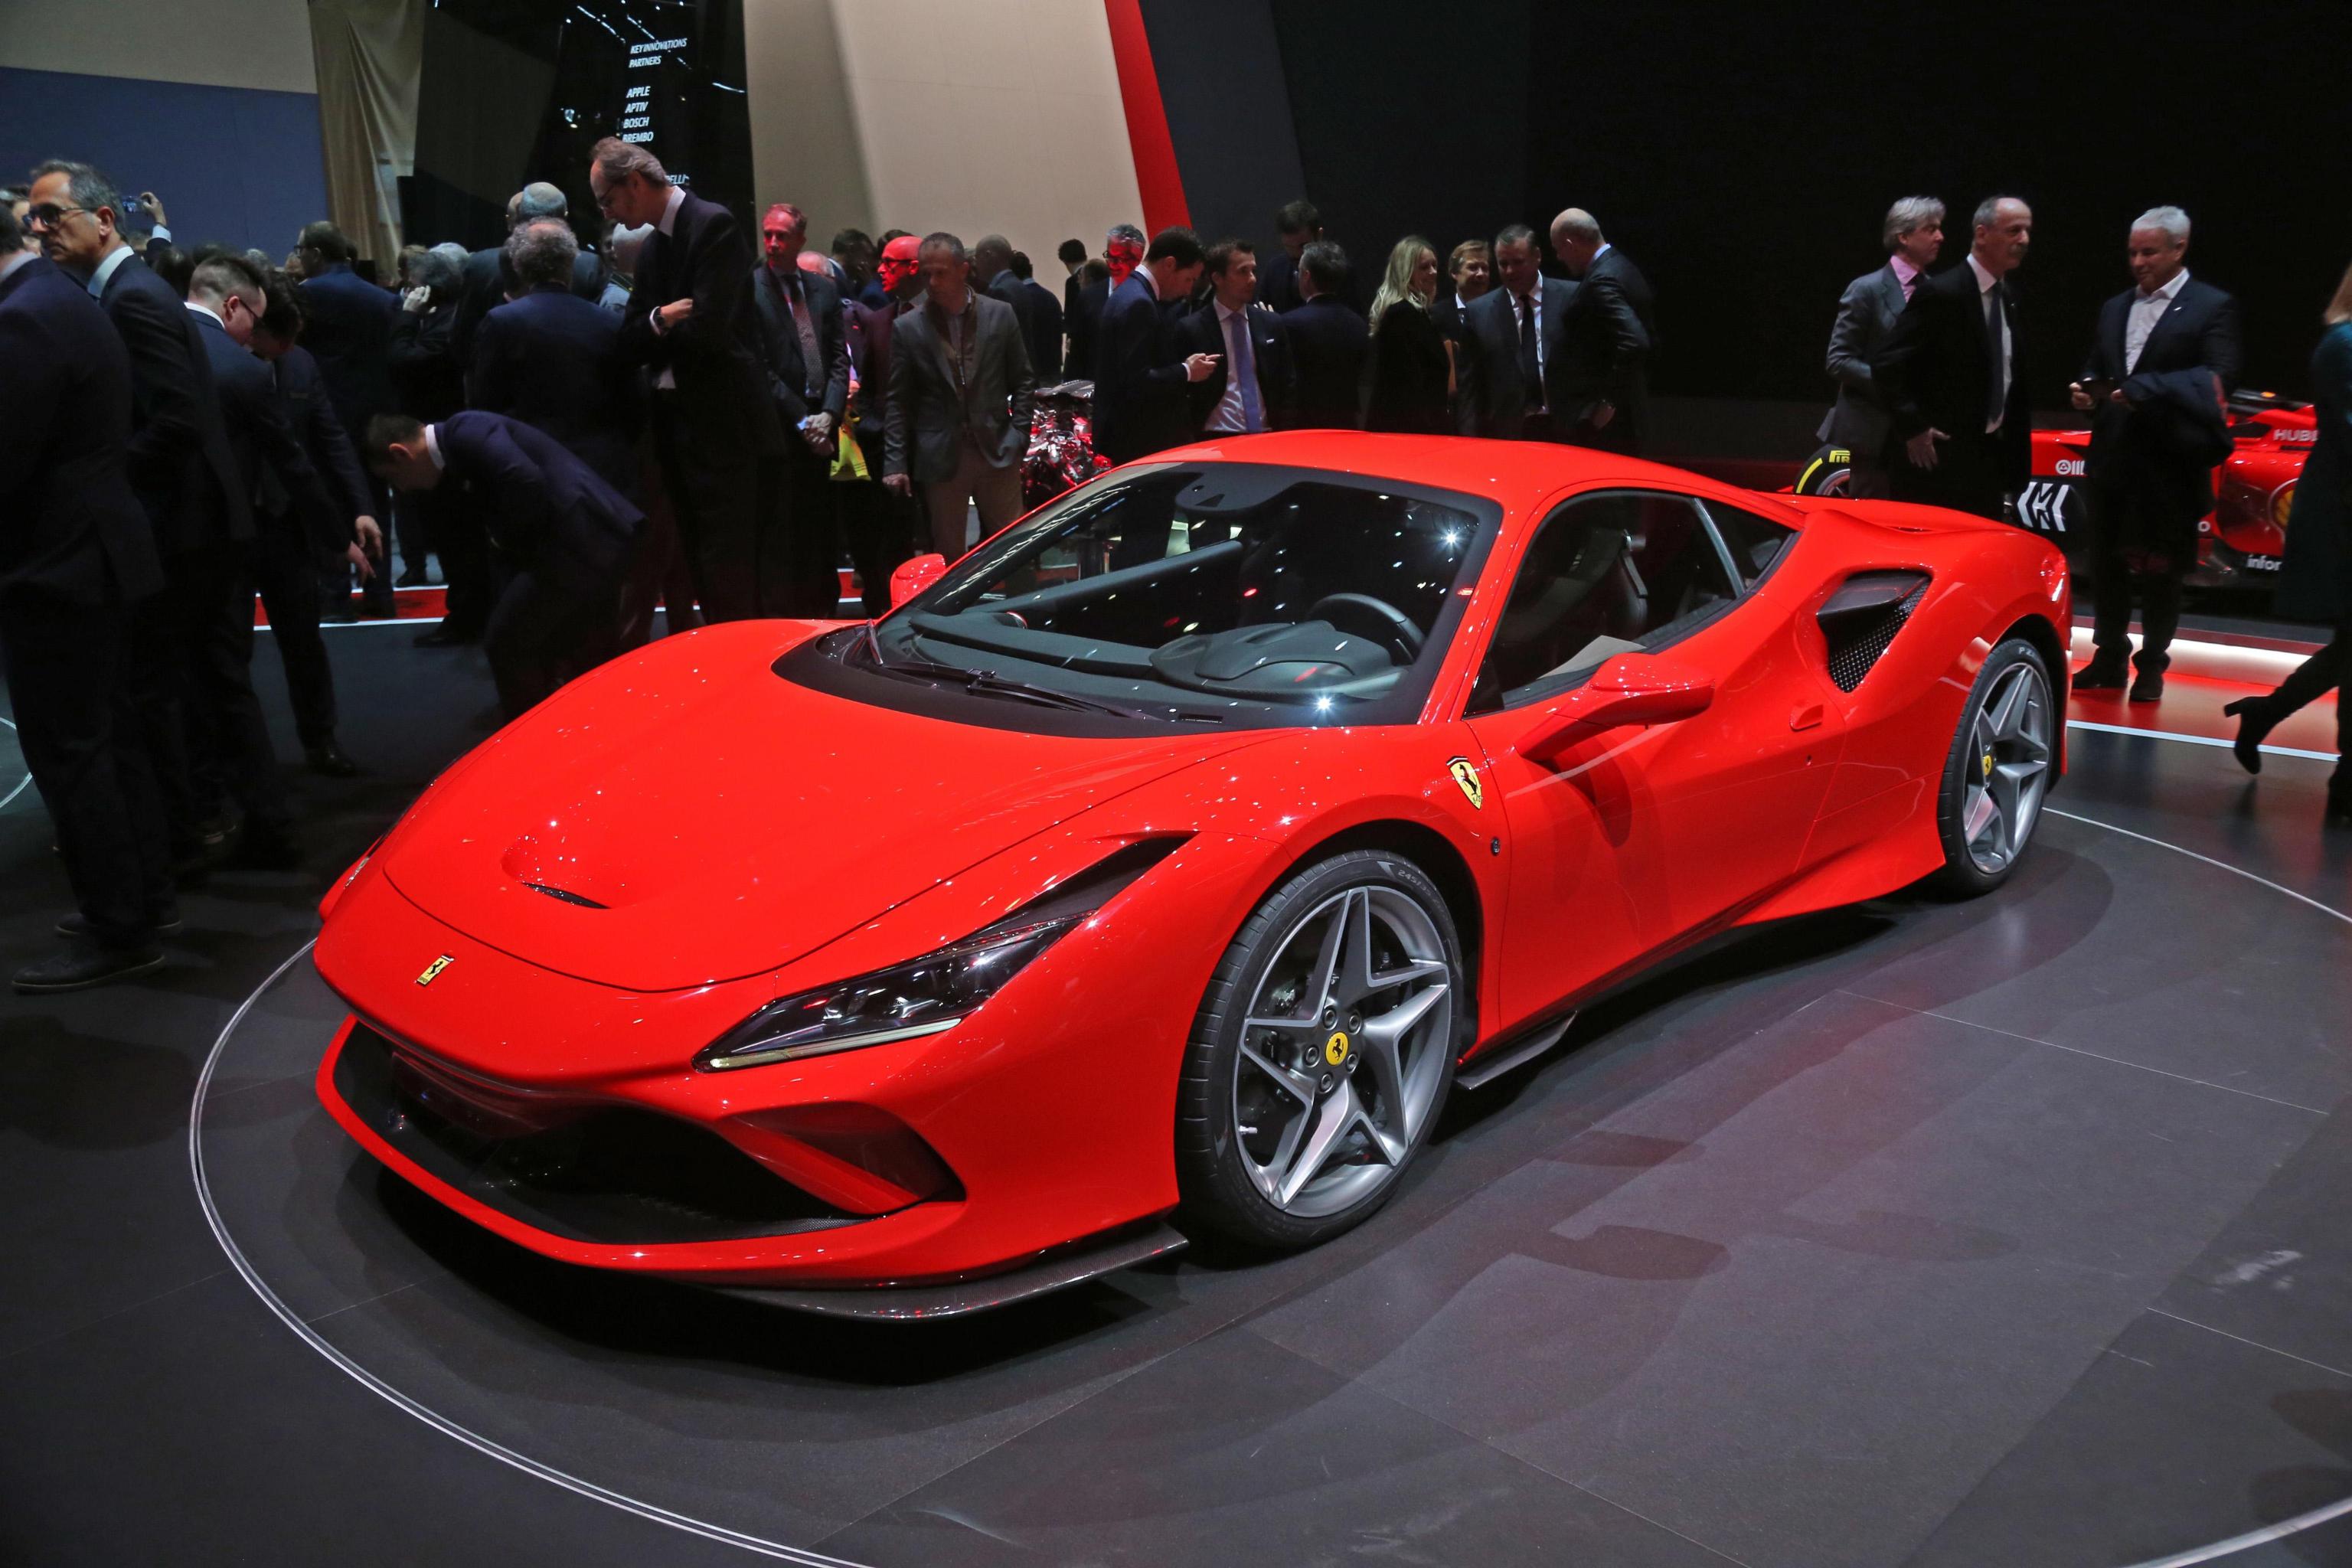 La F8 Tributo, erede della 488 Gtb, presentata al Salone di Ginevra, 5 marzo 2019. ANSA/UFFICIO STAMPA FERRARI +++ ANSA PROVIDES ACCESS TO THIS HANDOUT PHOTO TO BE USED SOLELY TO ILLUSTRATE NEWS REPORTING OR COMMENTARY ON THE FACTS OR EVENTS DEPICTED IN THIS IMAGE; NO ARCHIVING; NO LICENSING +++